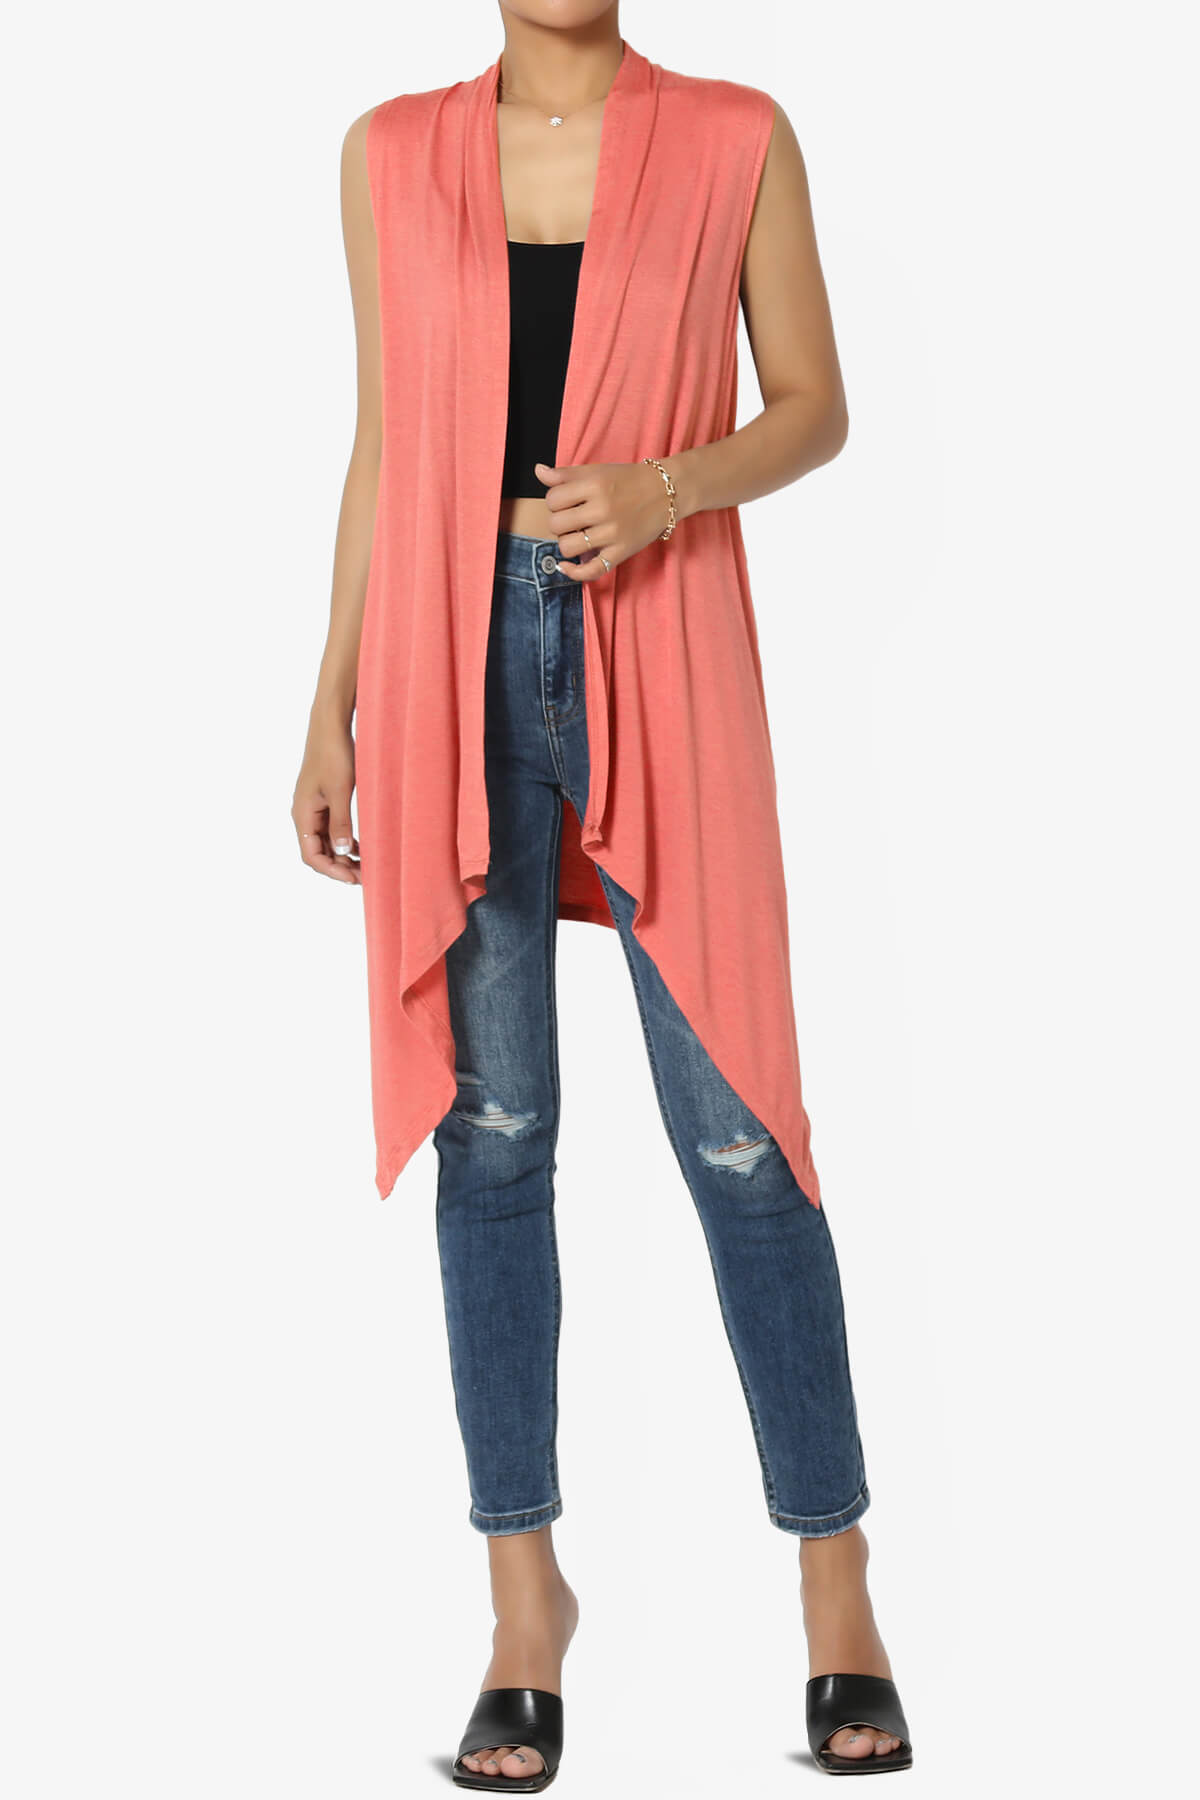 Load image into Gallery viewer, Taysom Draped Open Front Sleeveless Cardigan Vest CORAL_6
